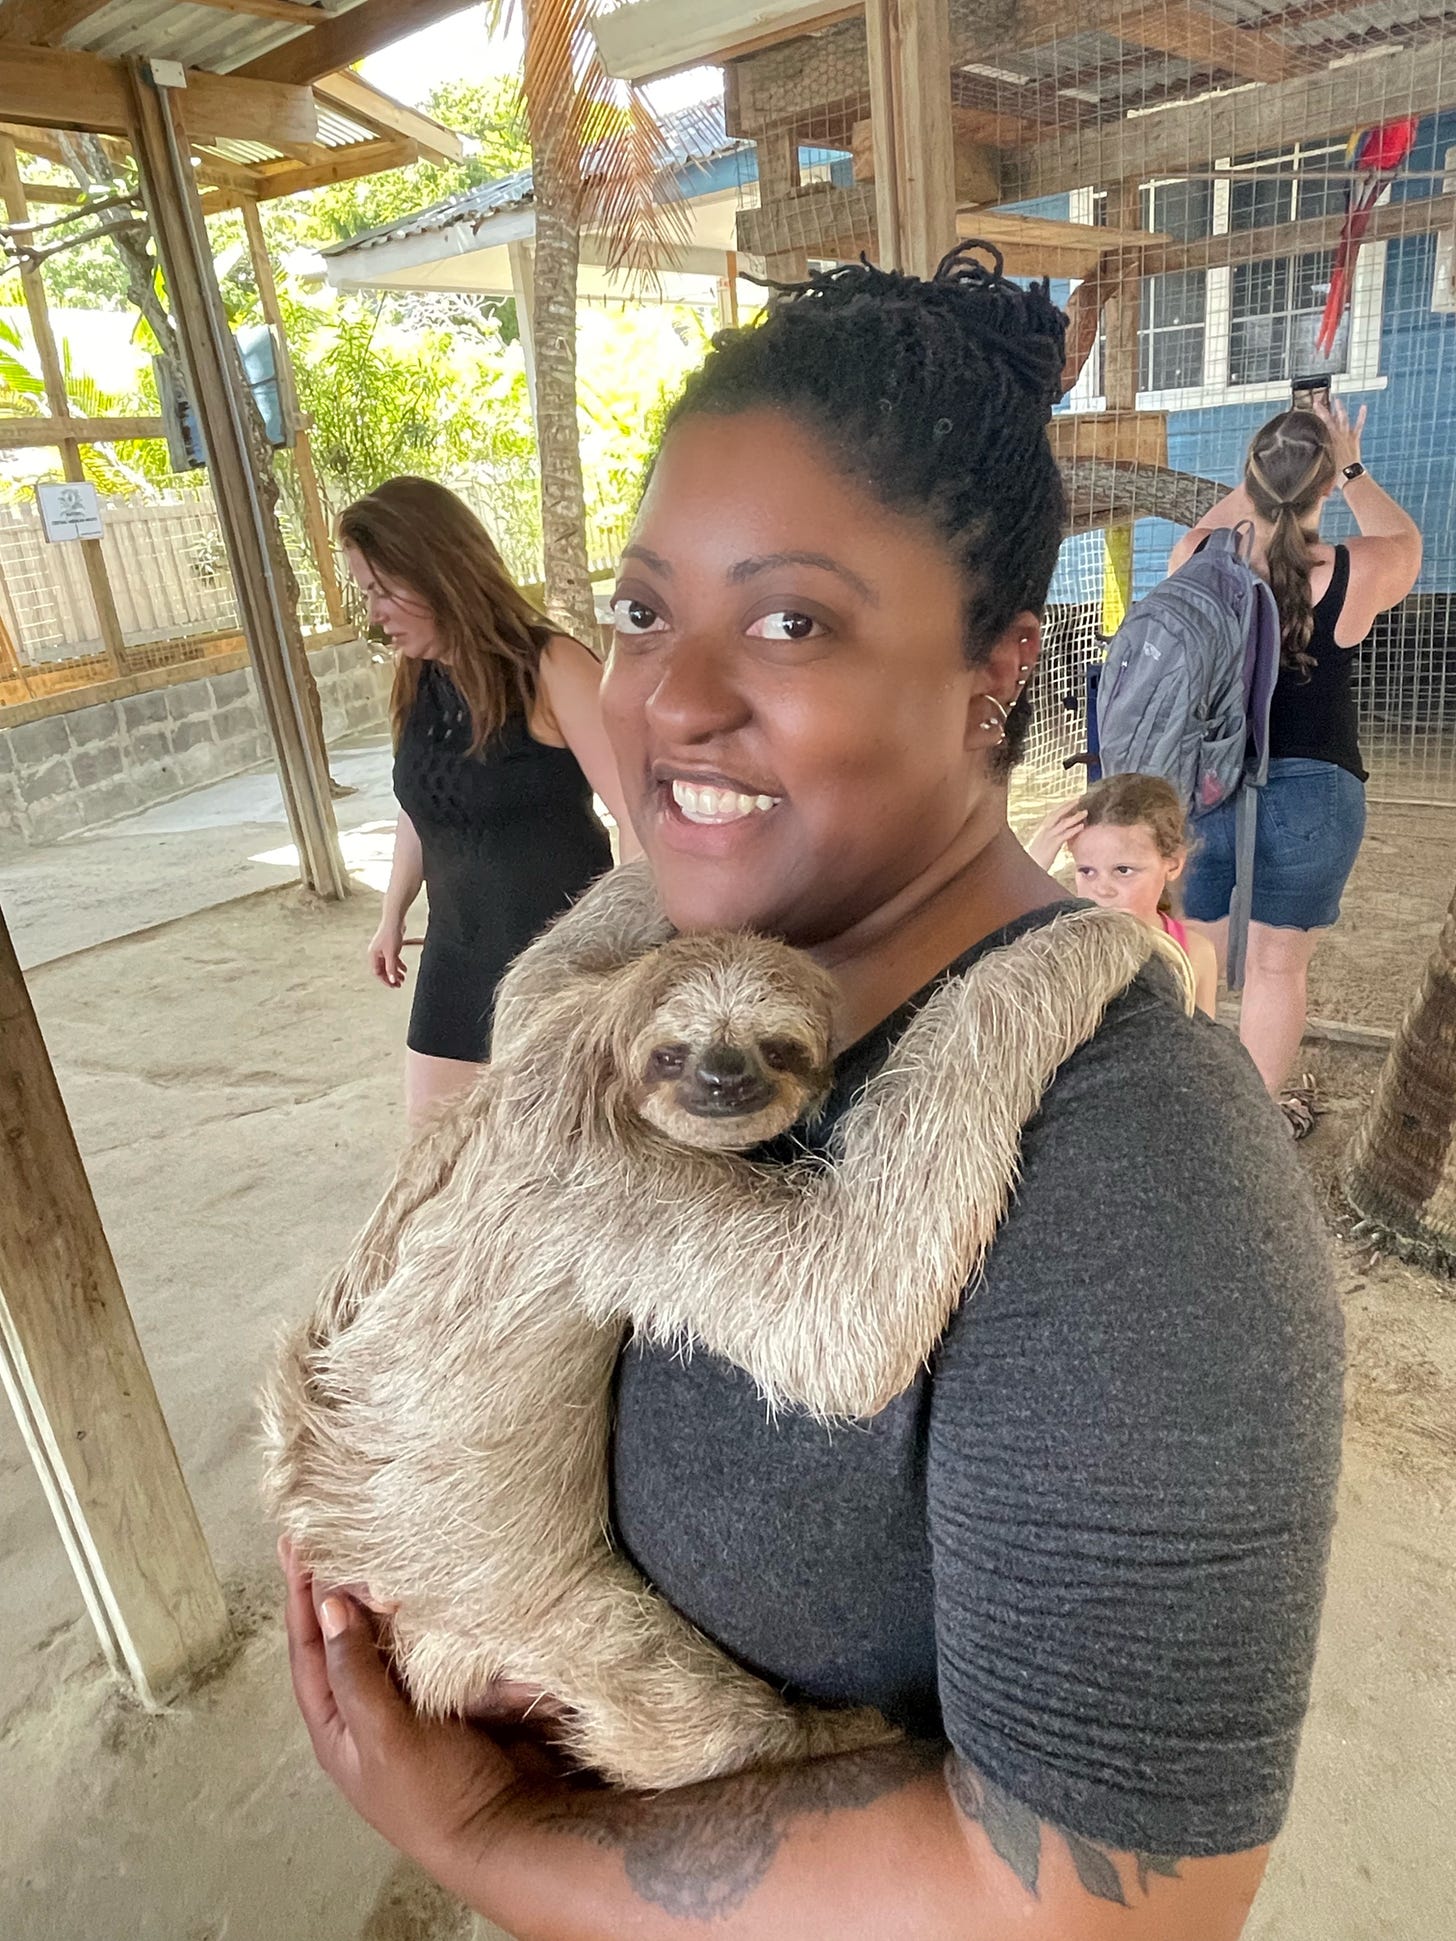 At an animal sanctuary a three toed sloth is held by a smiling Black person with microdreads in a bun